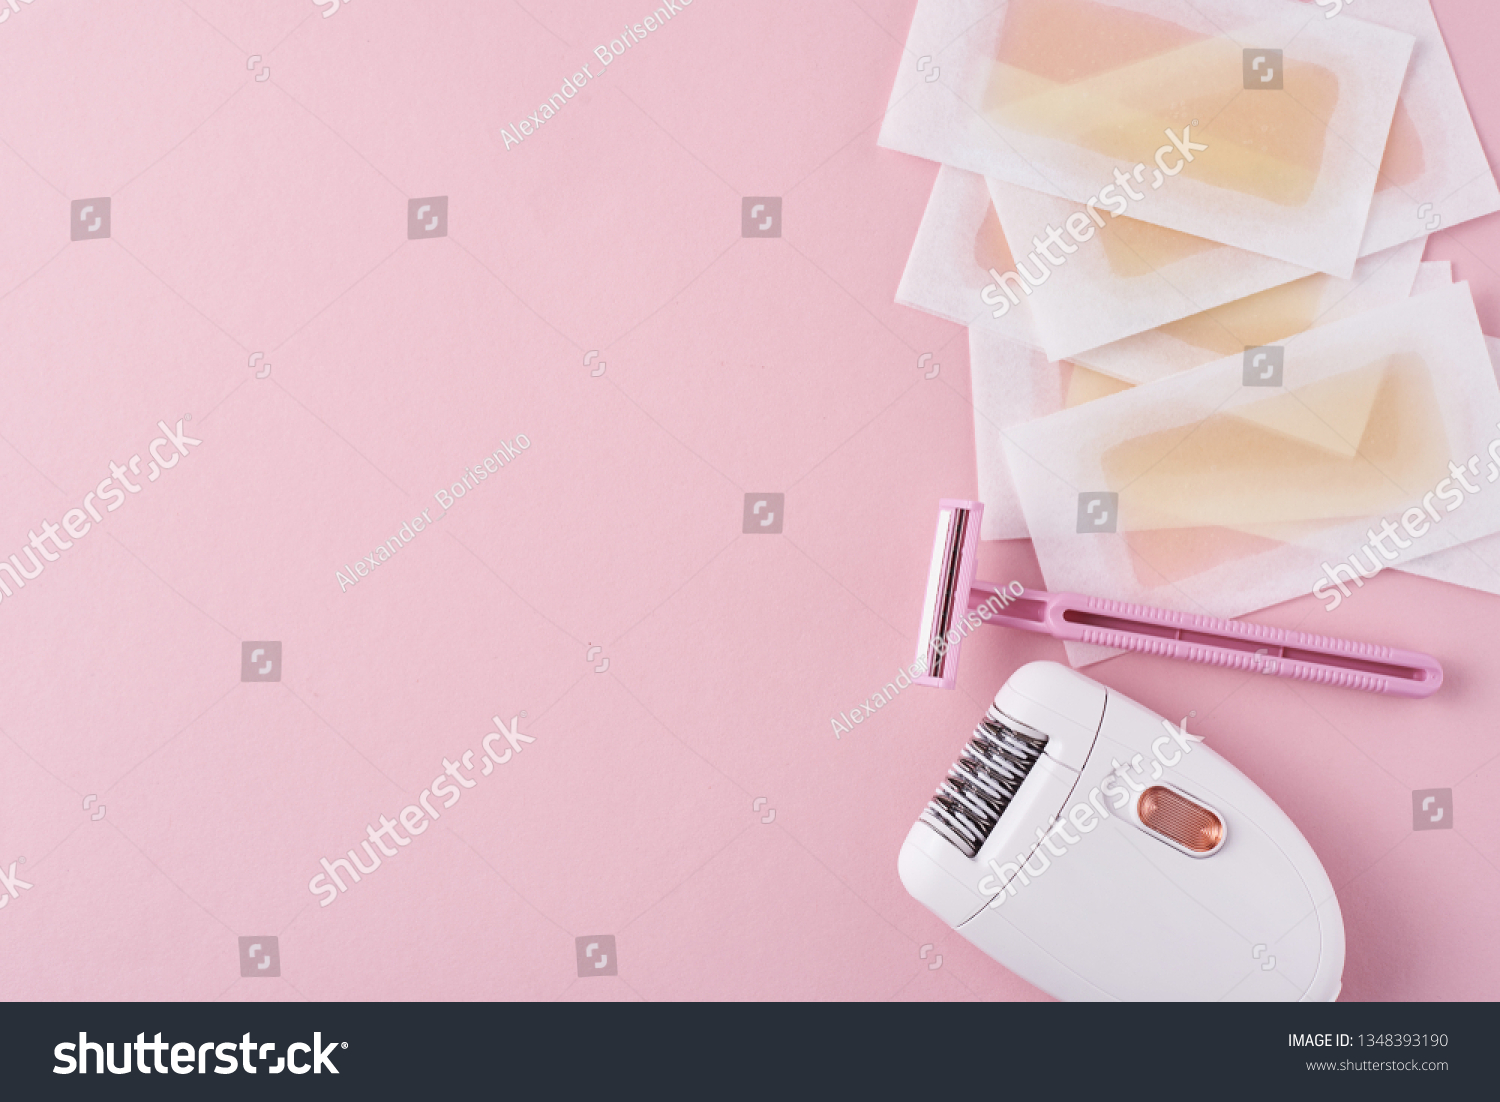 Epilator, razor for shaving and wax strips on pink background with copy space. Set for depilation, bodycare concept #1348393190